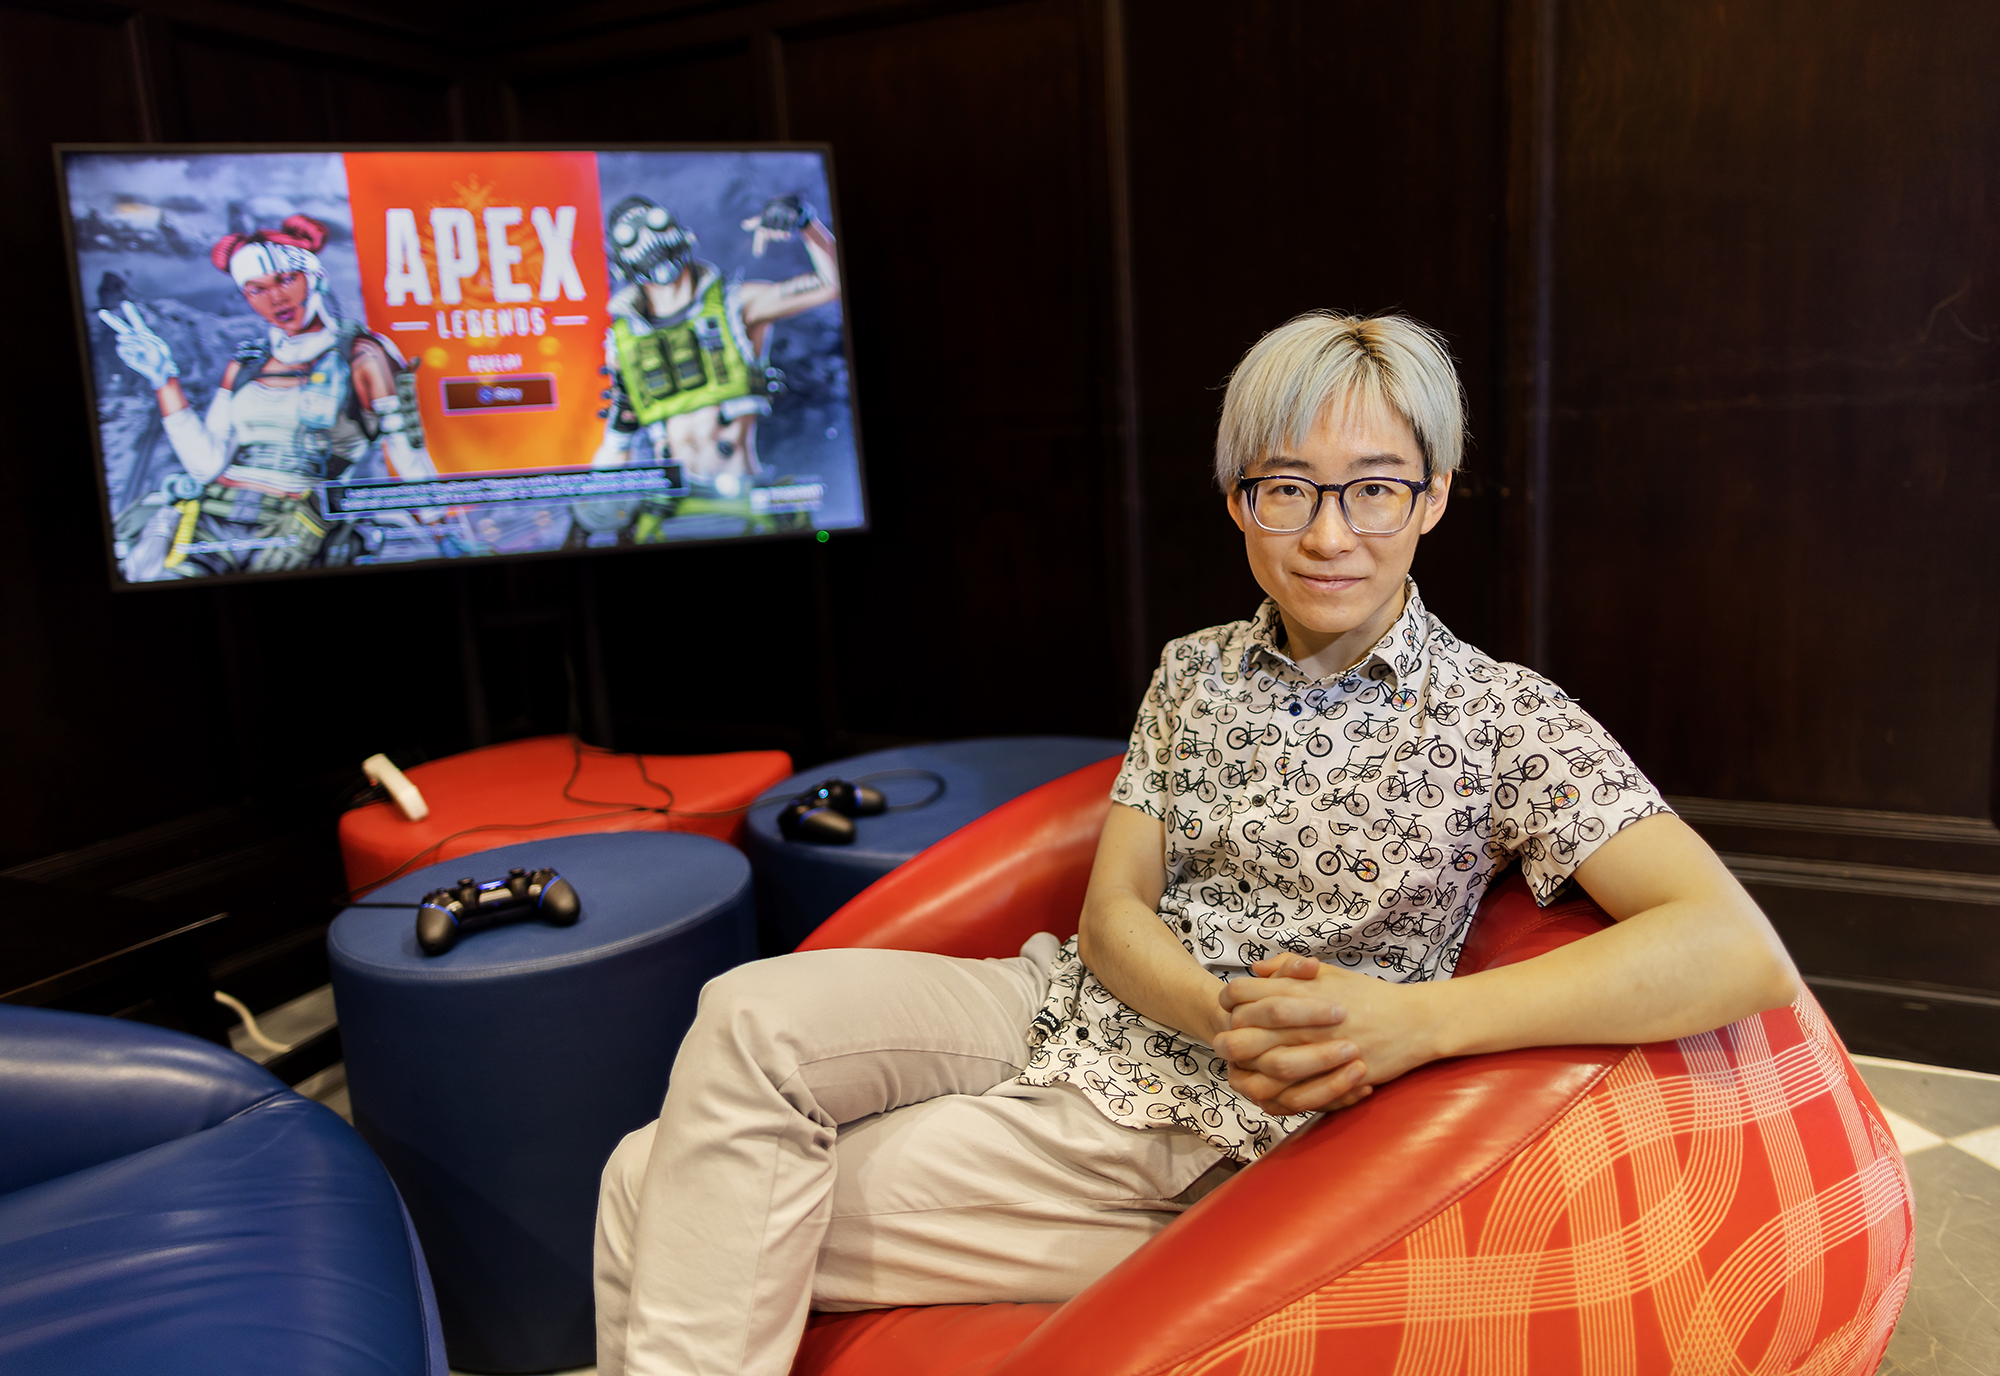 Mengyang Zhao rests on a bean bag chair with a video game that reads 'Apex Legends' in the background